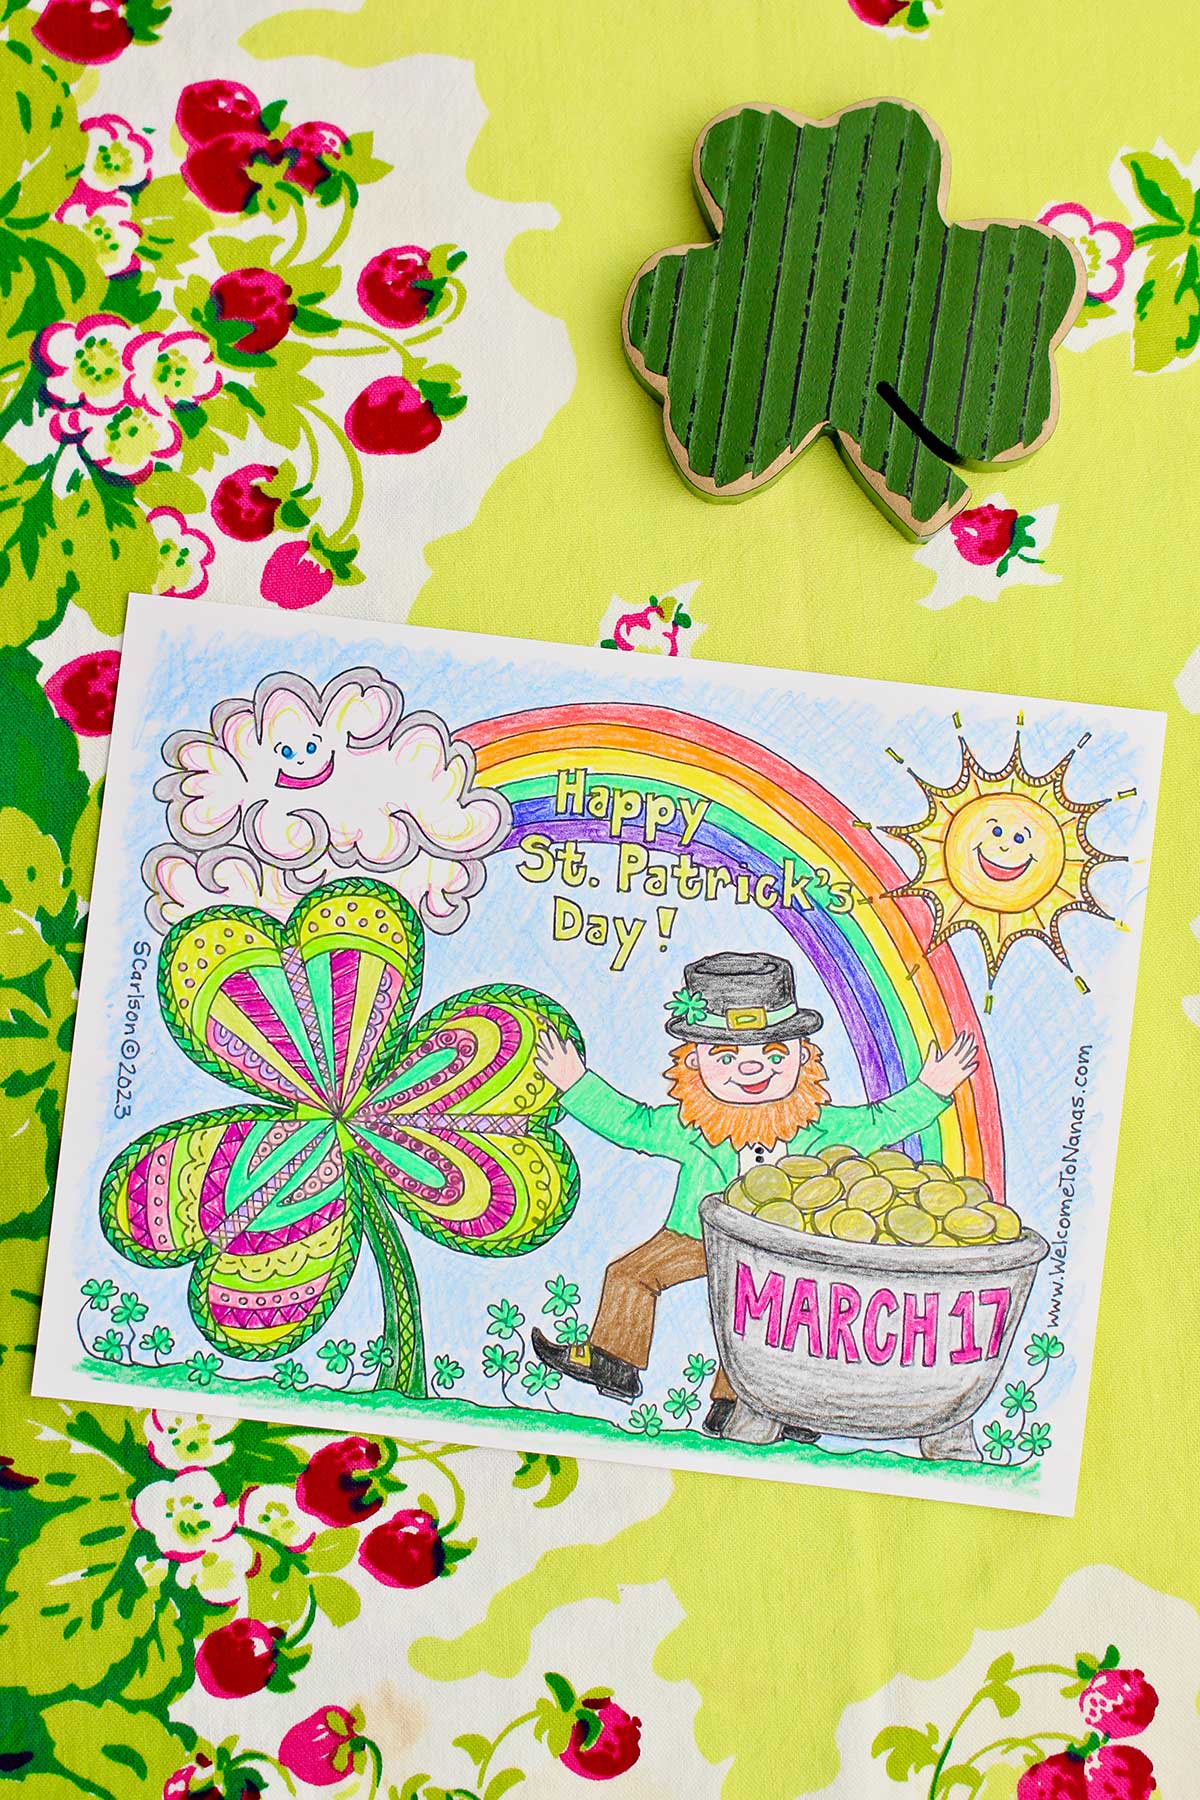 Completed St. Patrick's Day coloring page sitting on a green table cloth with strawberries on it with wooden shamrock near by.